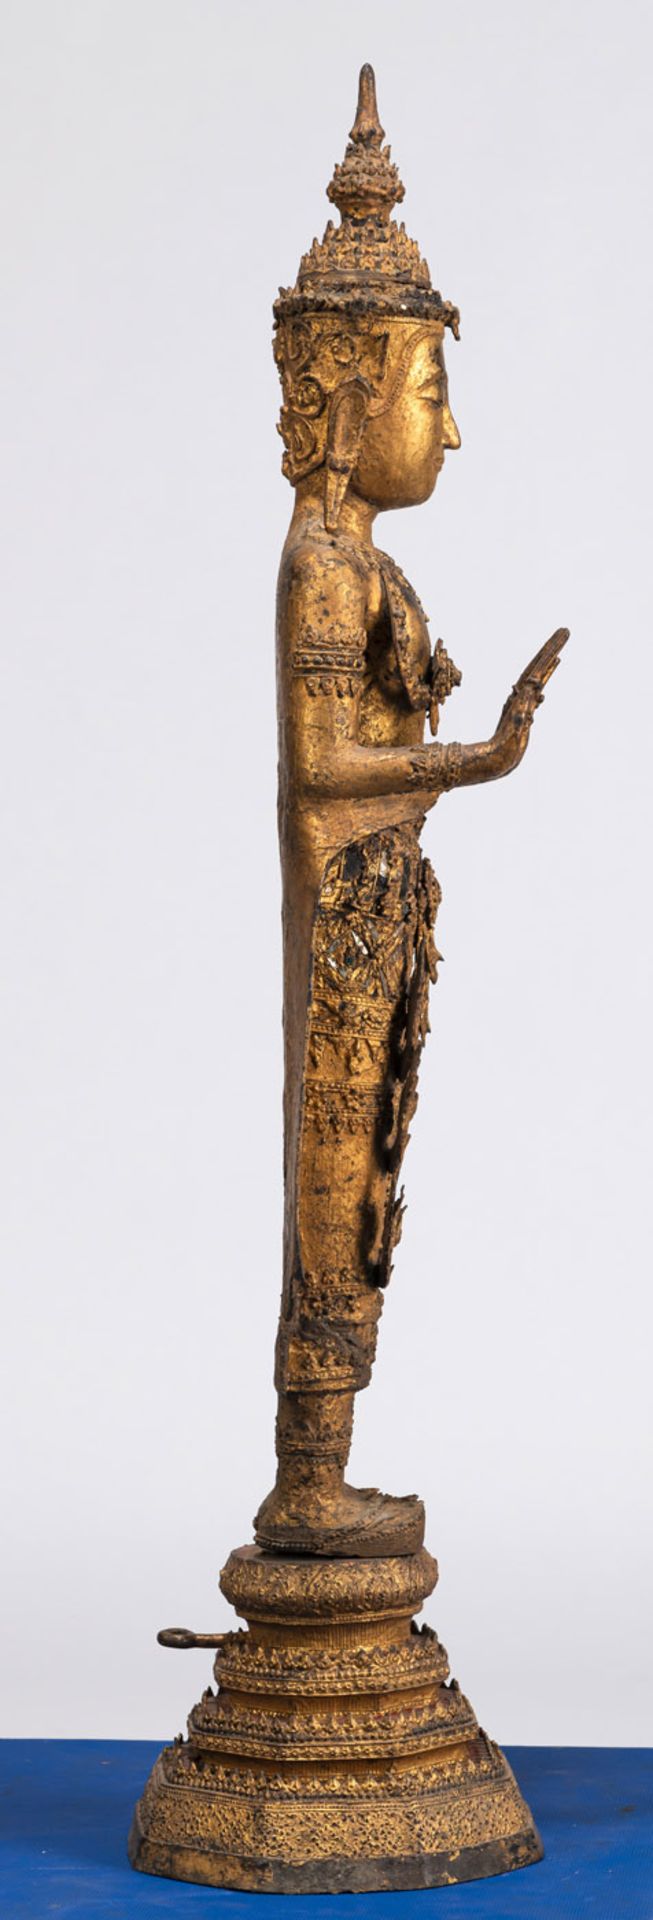 A GILT- AND BLACK LACQUERED BRONZE FIGURE OF THE BUDDHA PAREE - Image 2 of 5